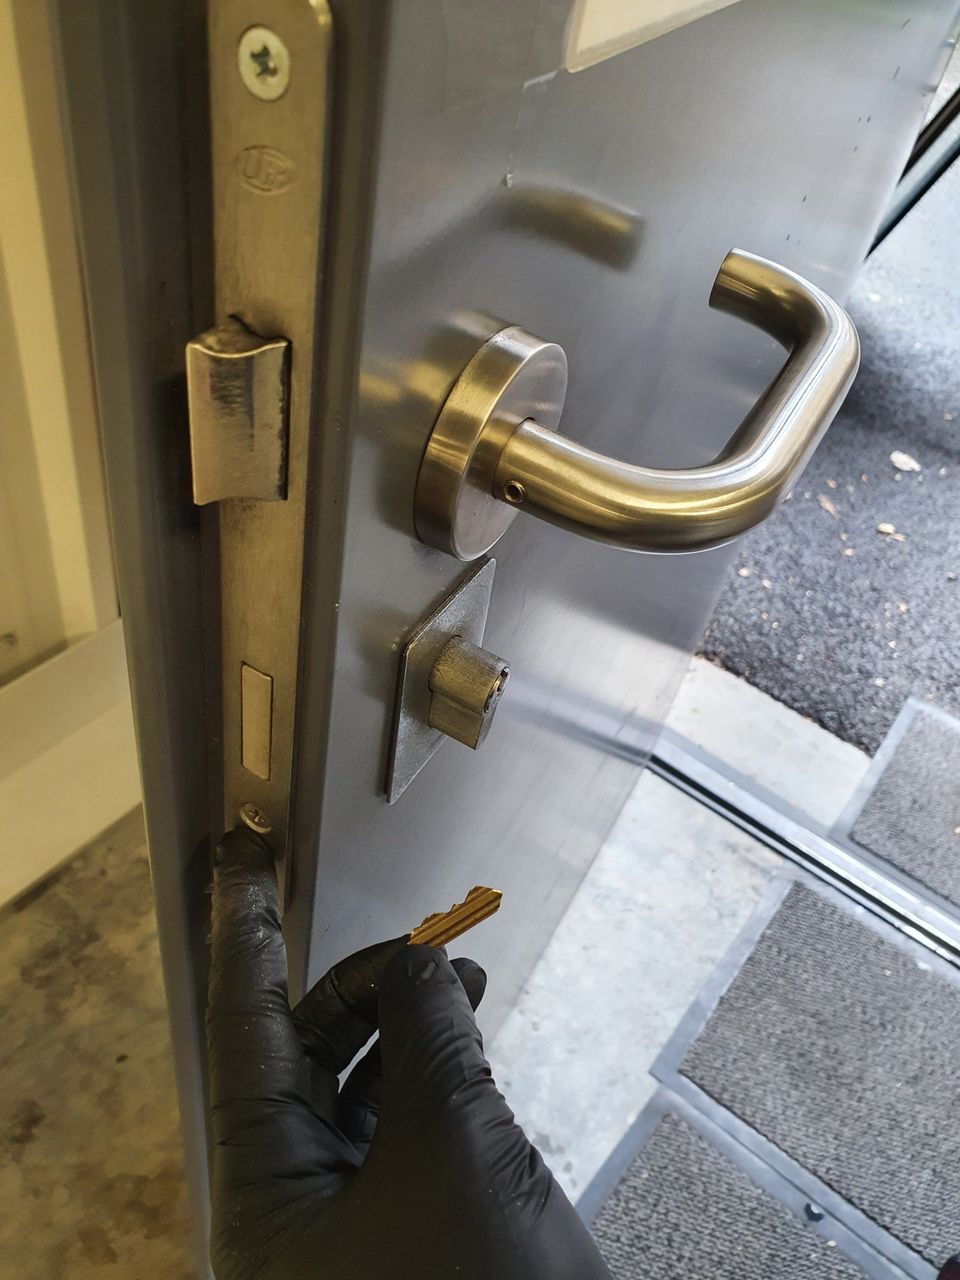 Broken key removal in London during Covid19